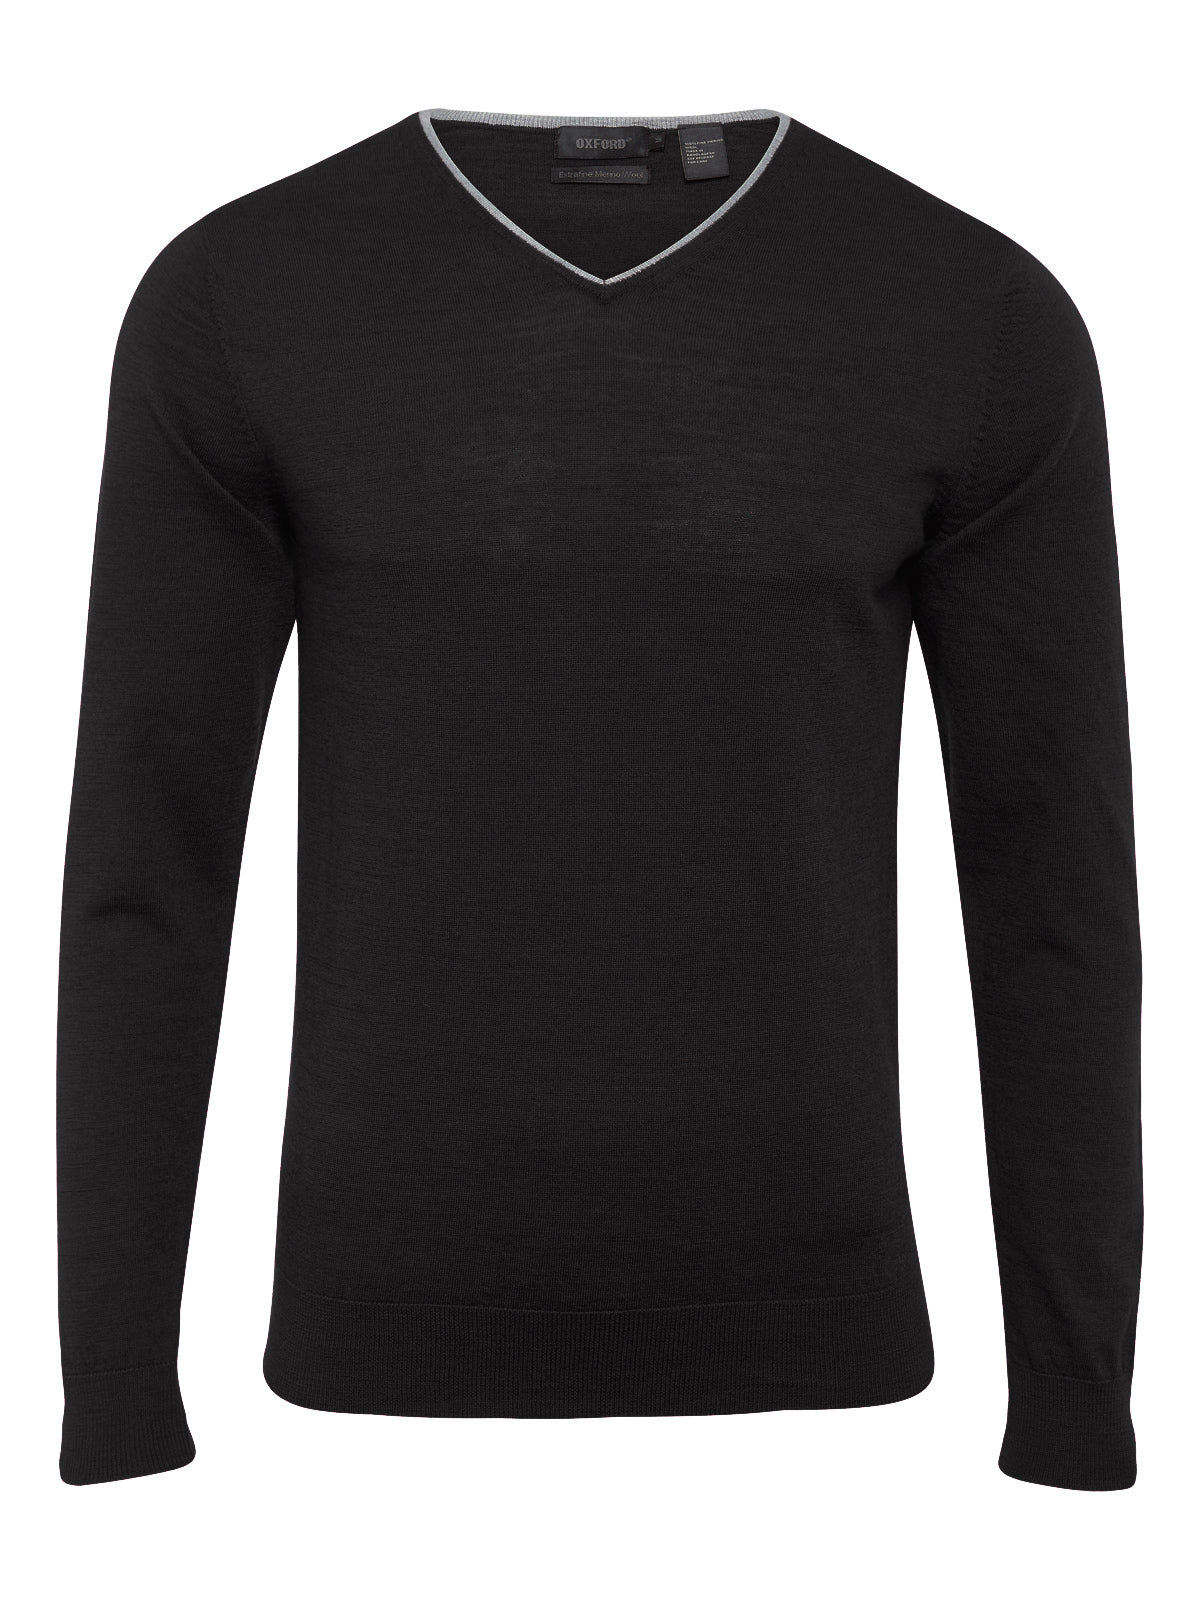 PERRY V-NECK WITH TIPPING PULLOVERX